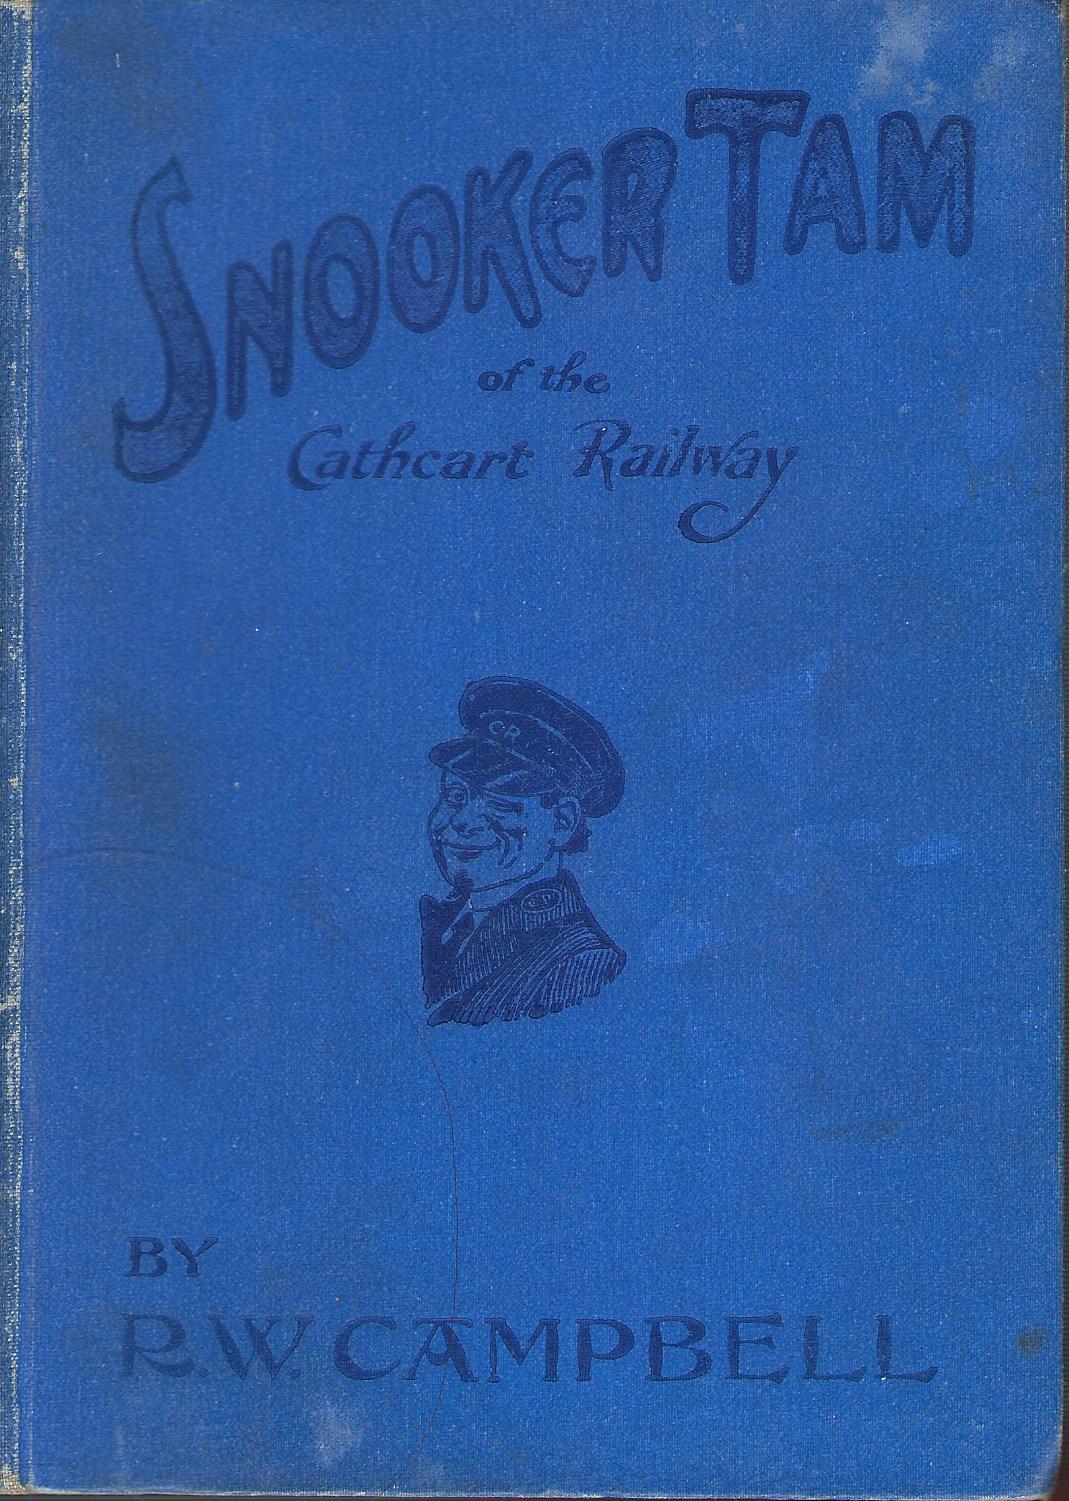 Image for Snooker Tam of the Cathcart Railway.